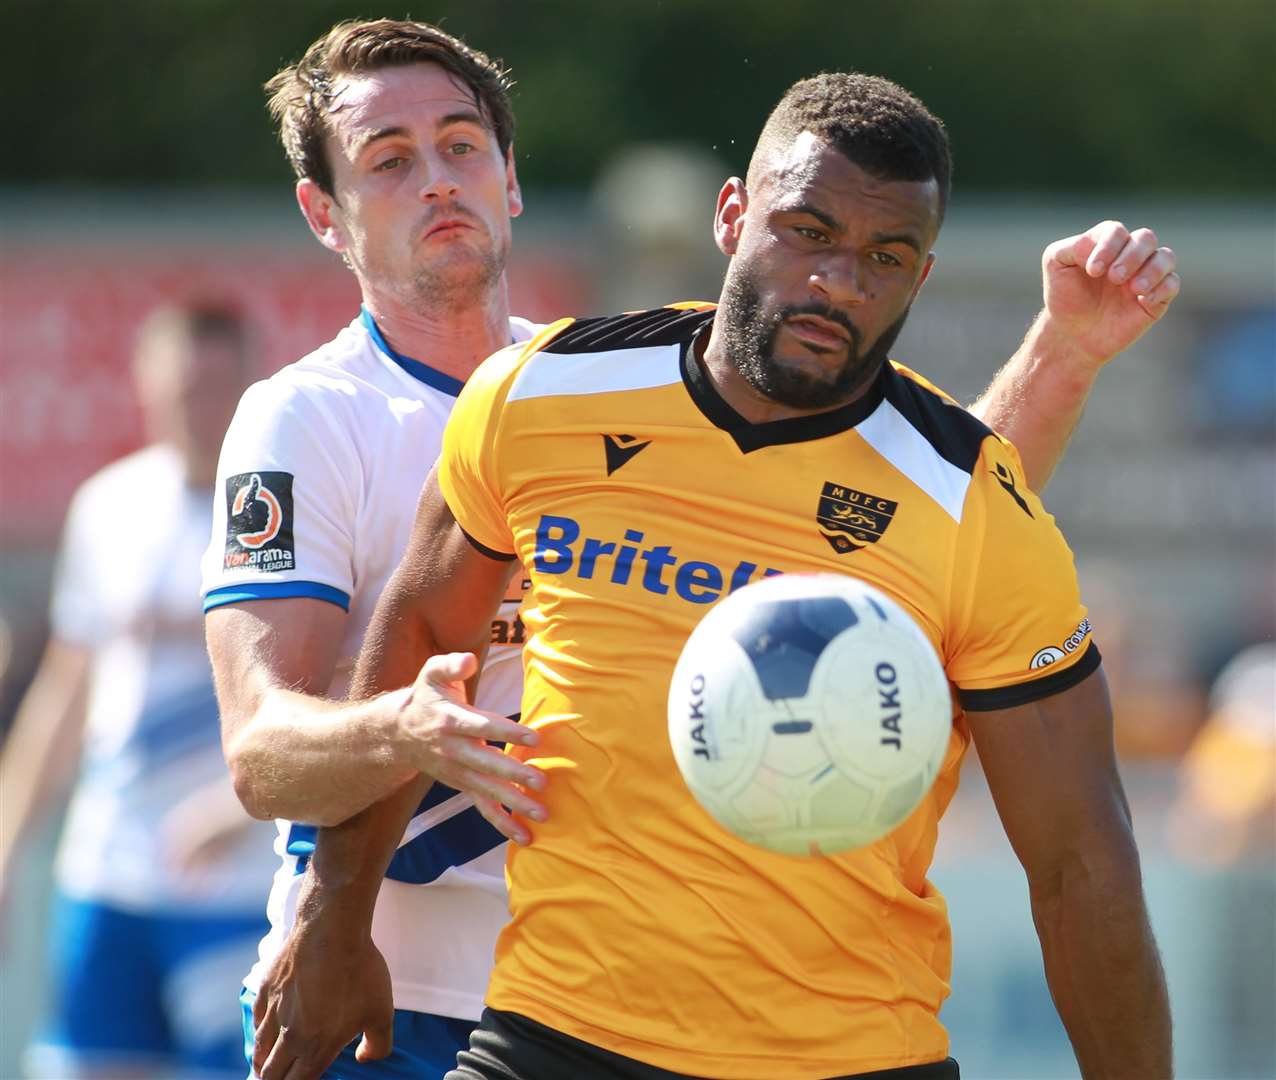 Dan Wishart in action for Maidstone against Chelmsford Picture: John Westhrop